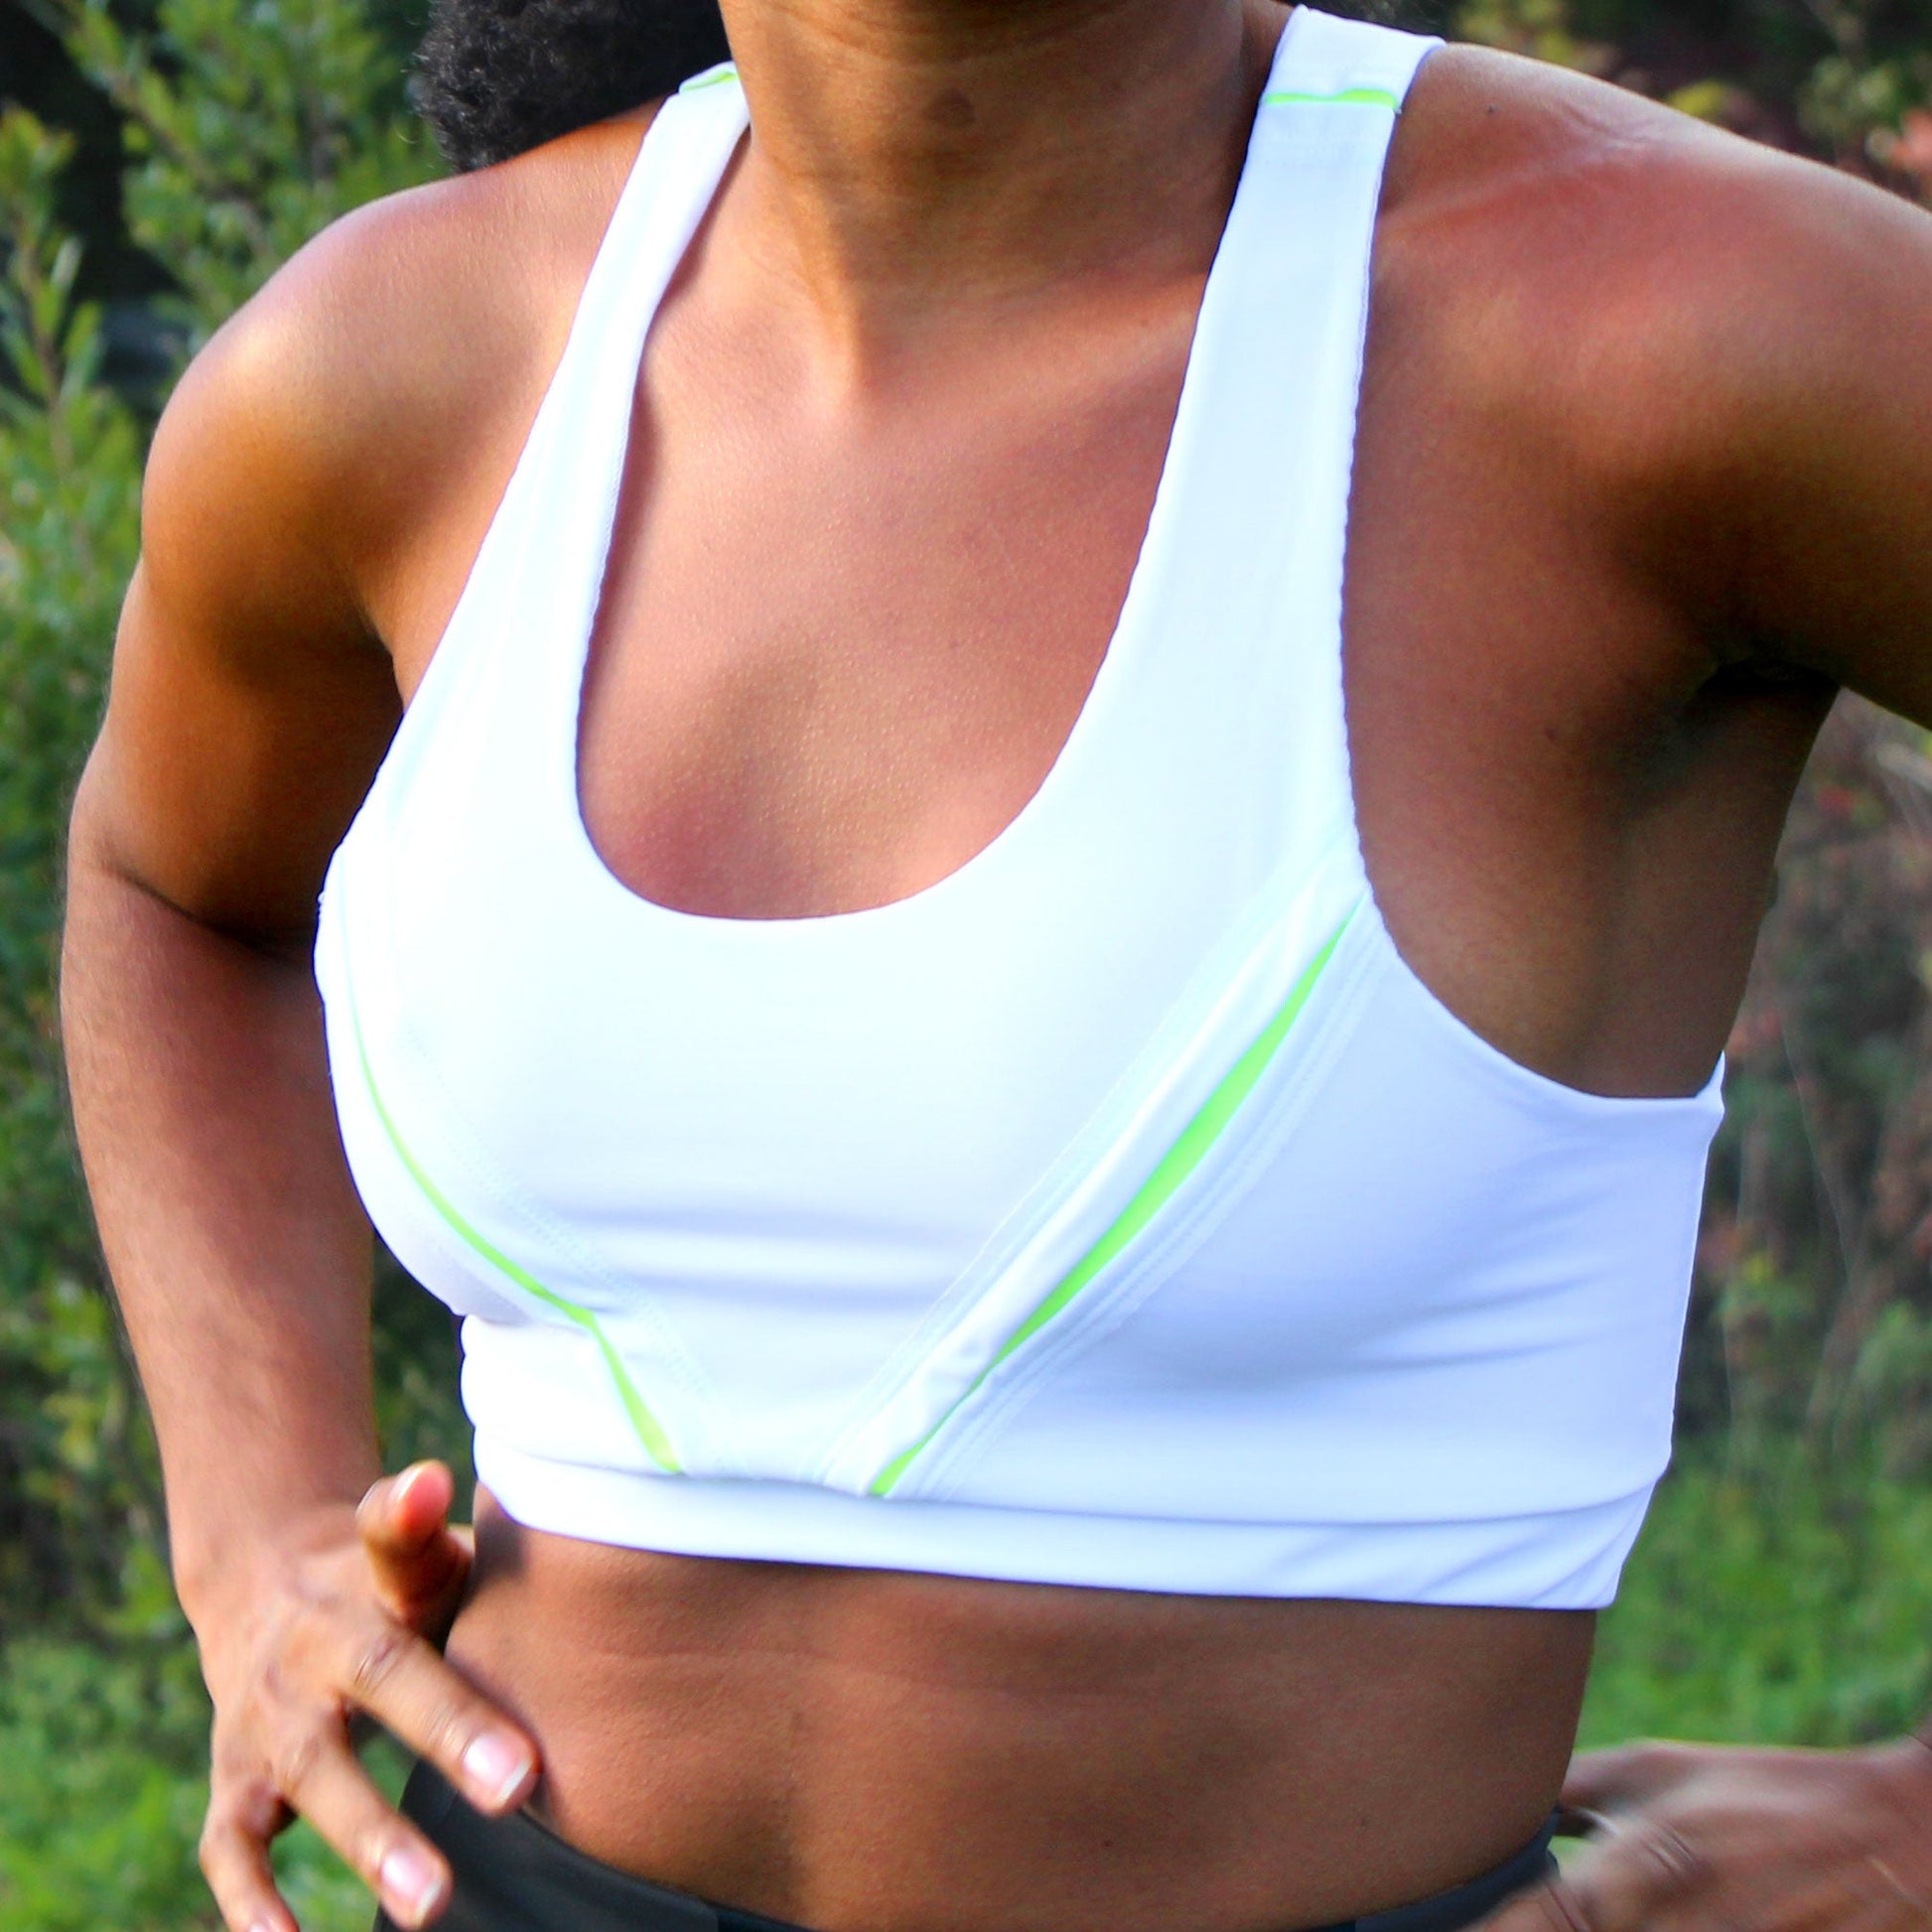 A closeup of a woman wearing a white and neon yellow sports bra